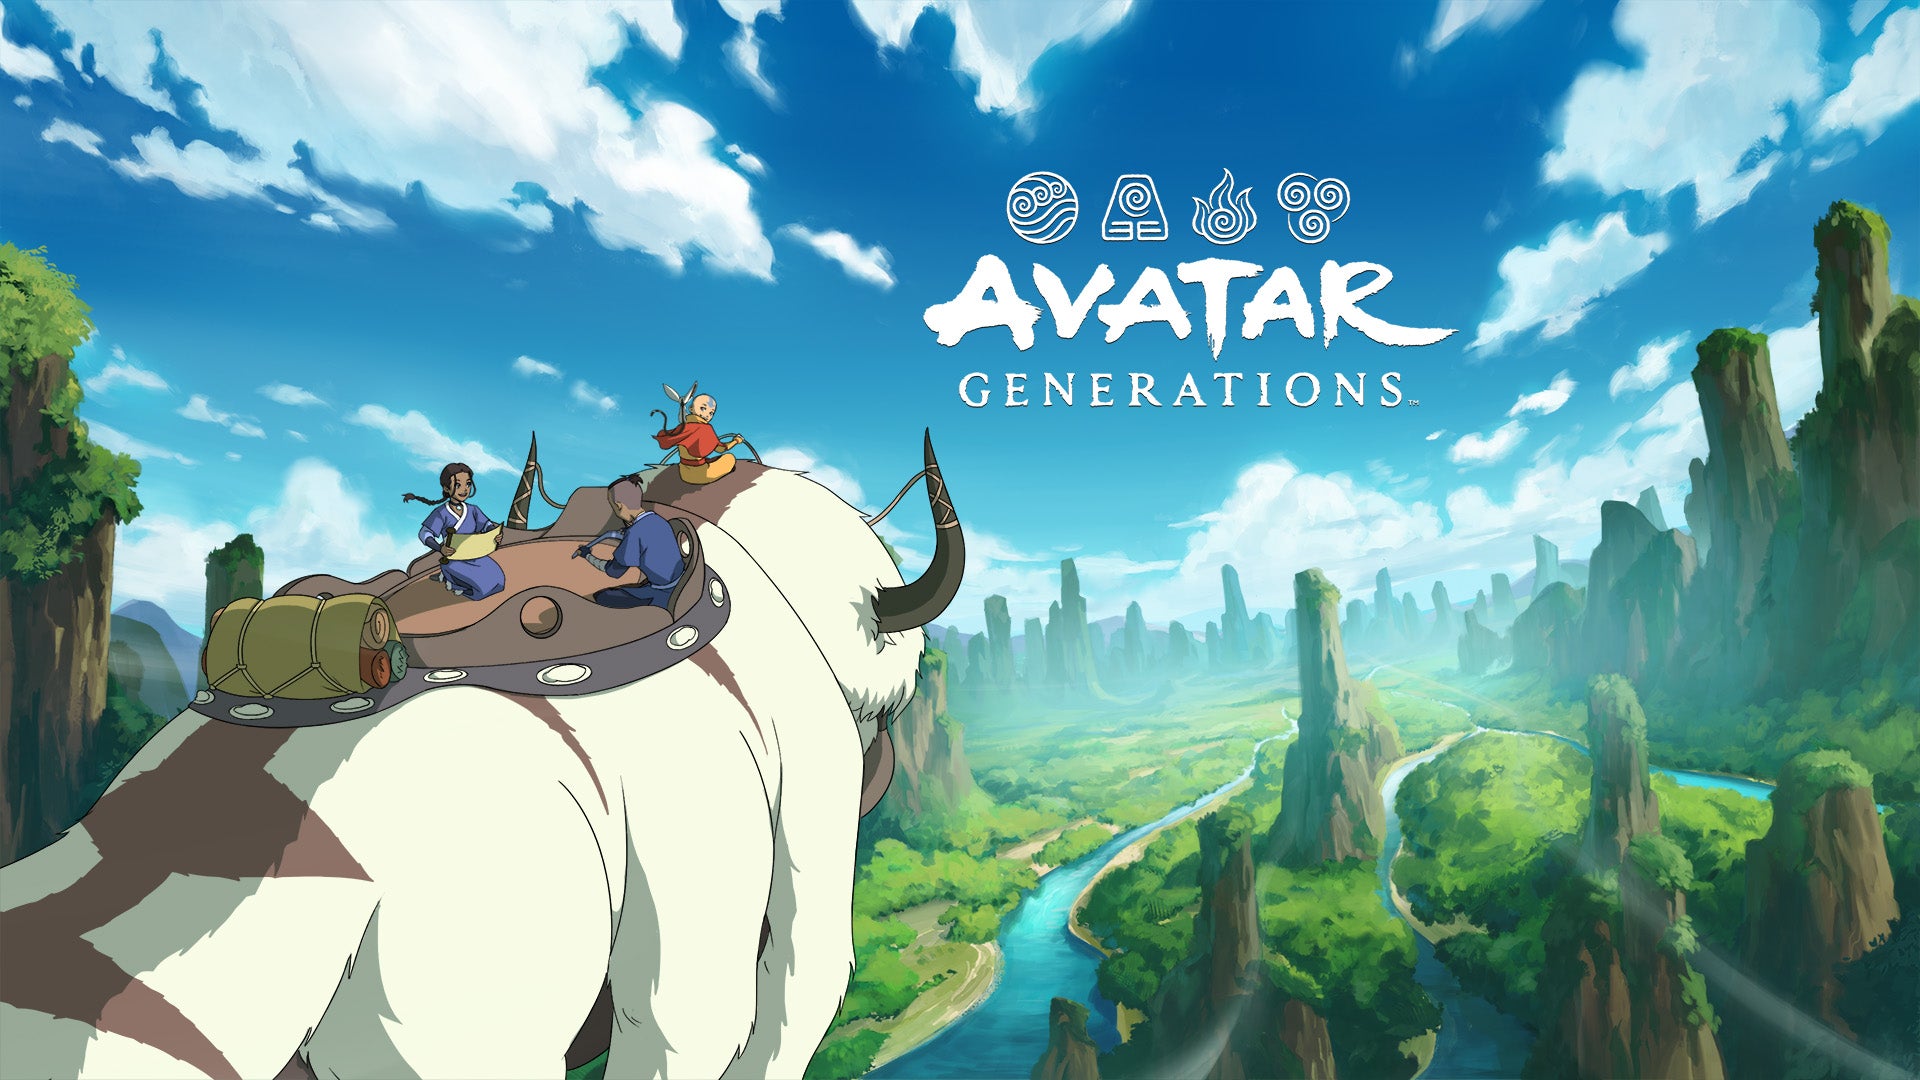 Image for Avatar: The Last Airbender is getting a mobile only open-world RPG